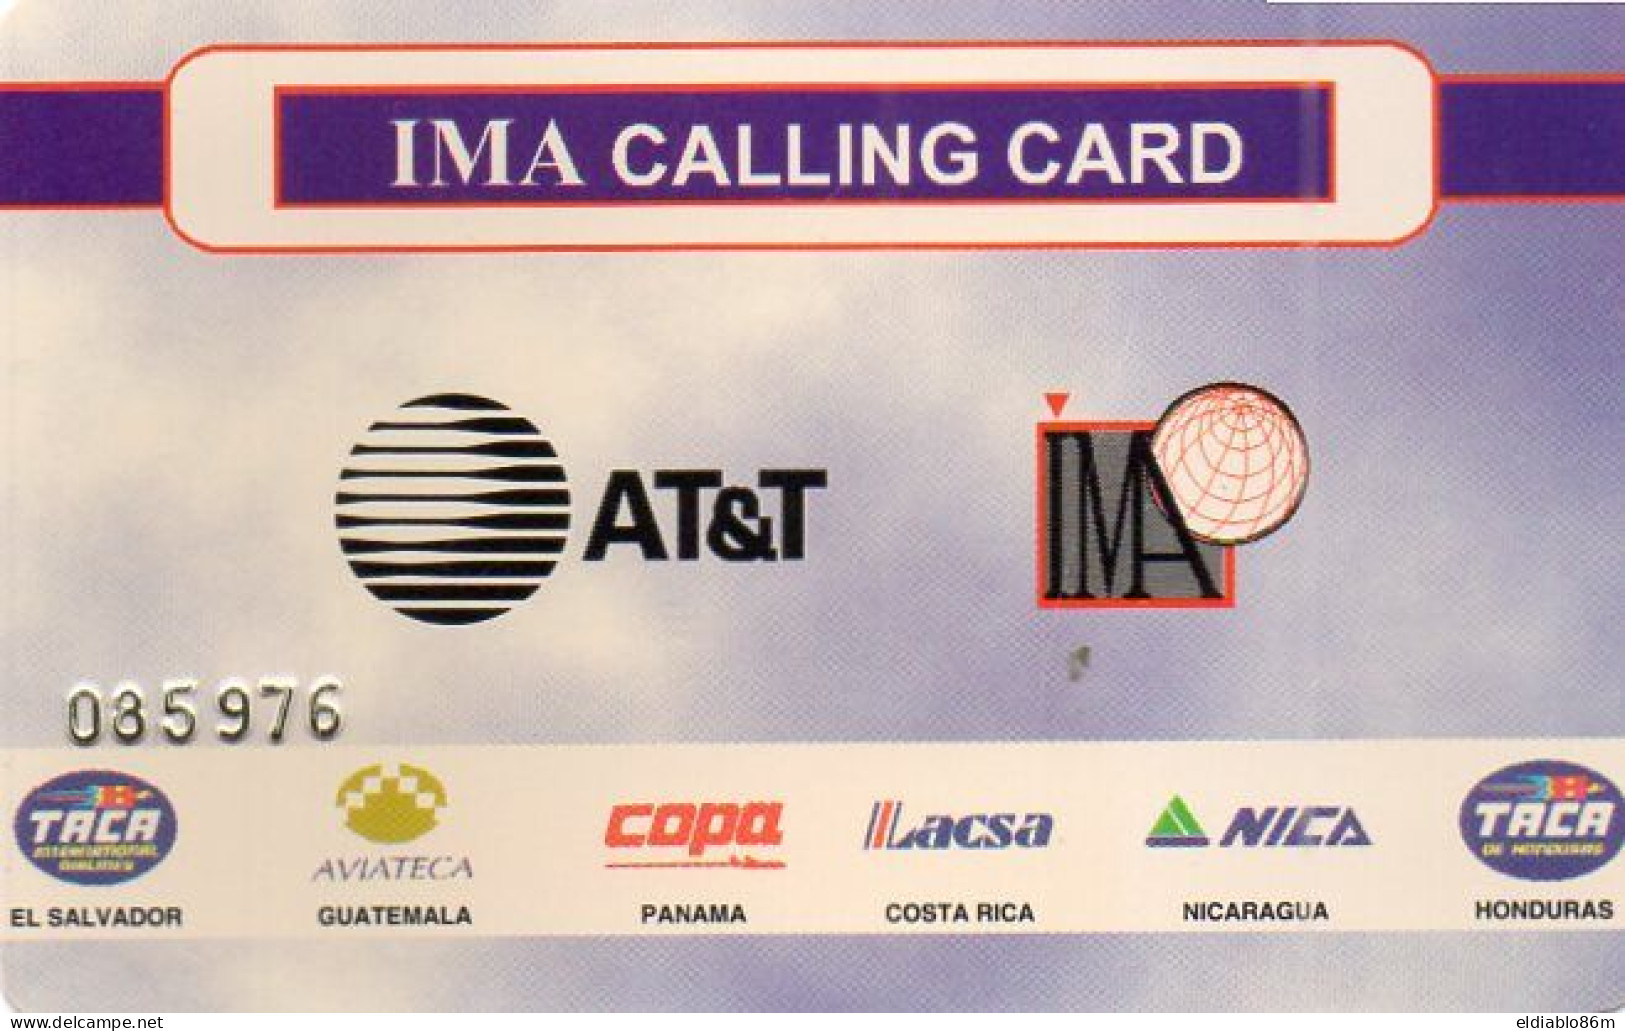 UNITED STATES - PREPAID - AT&T - IMA CALLING CARD - COBRAND SOUTH AMERICAN AIRLINES - AT&T